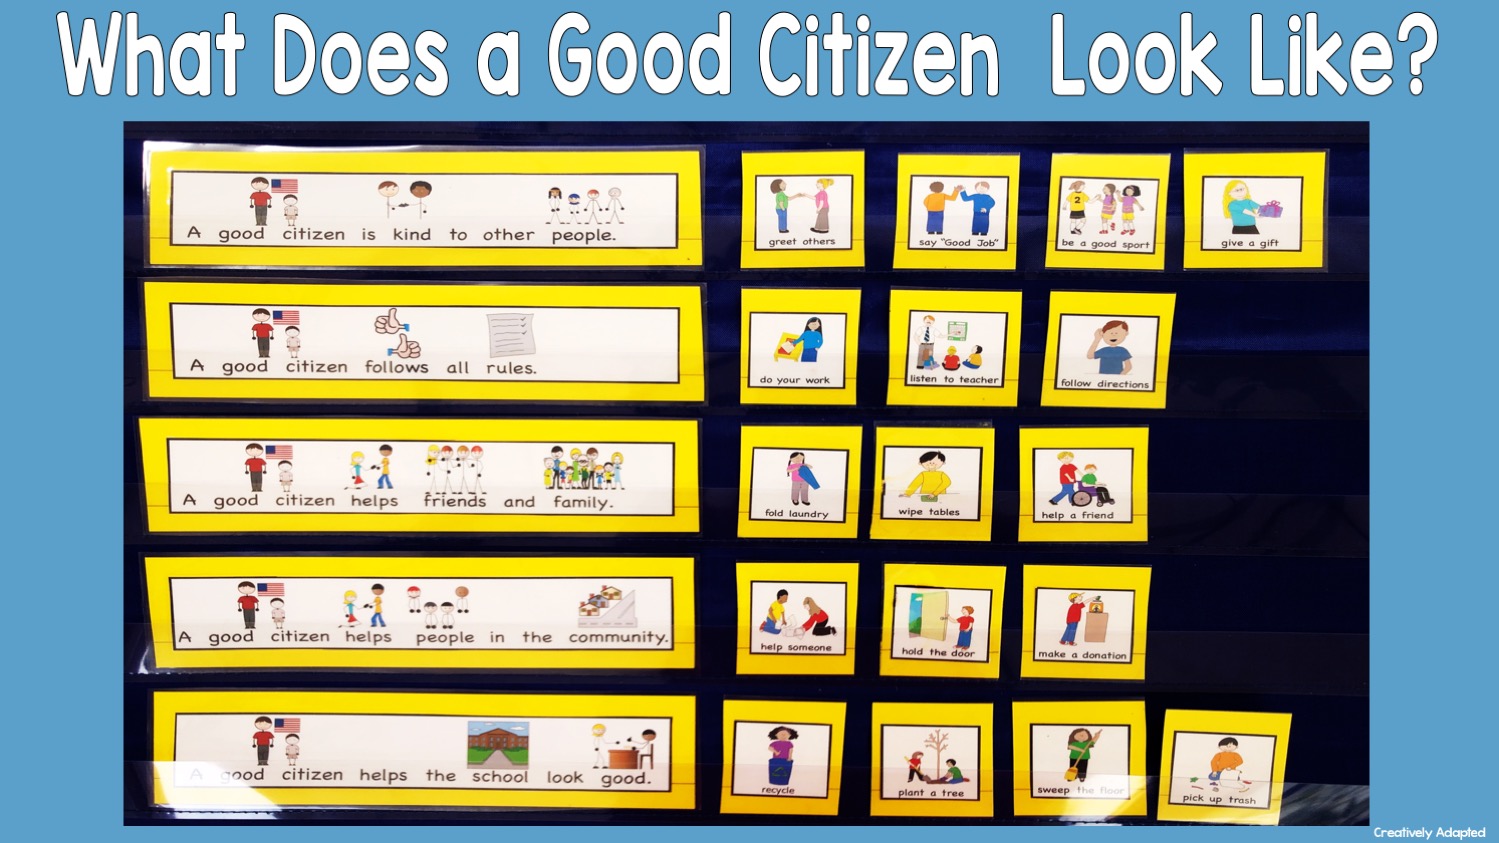 What Does a Good Citizen Look Like? citizenship attributes picture sort